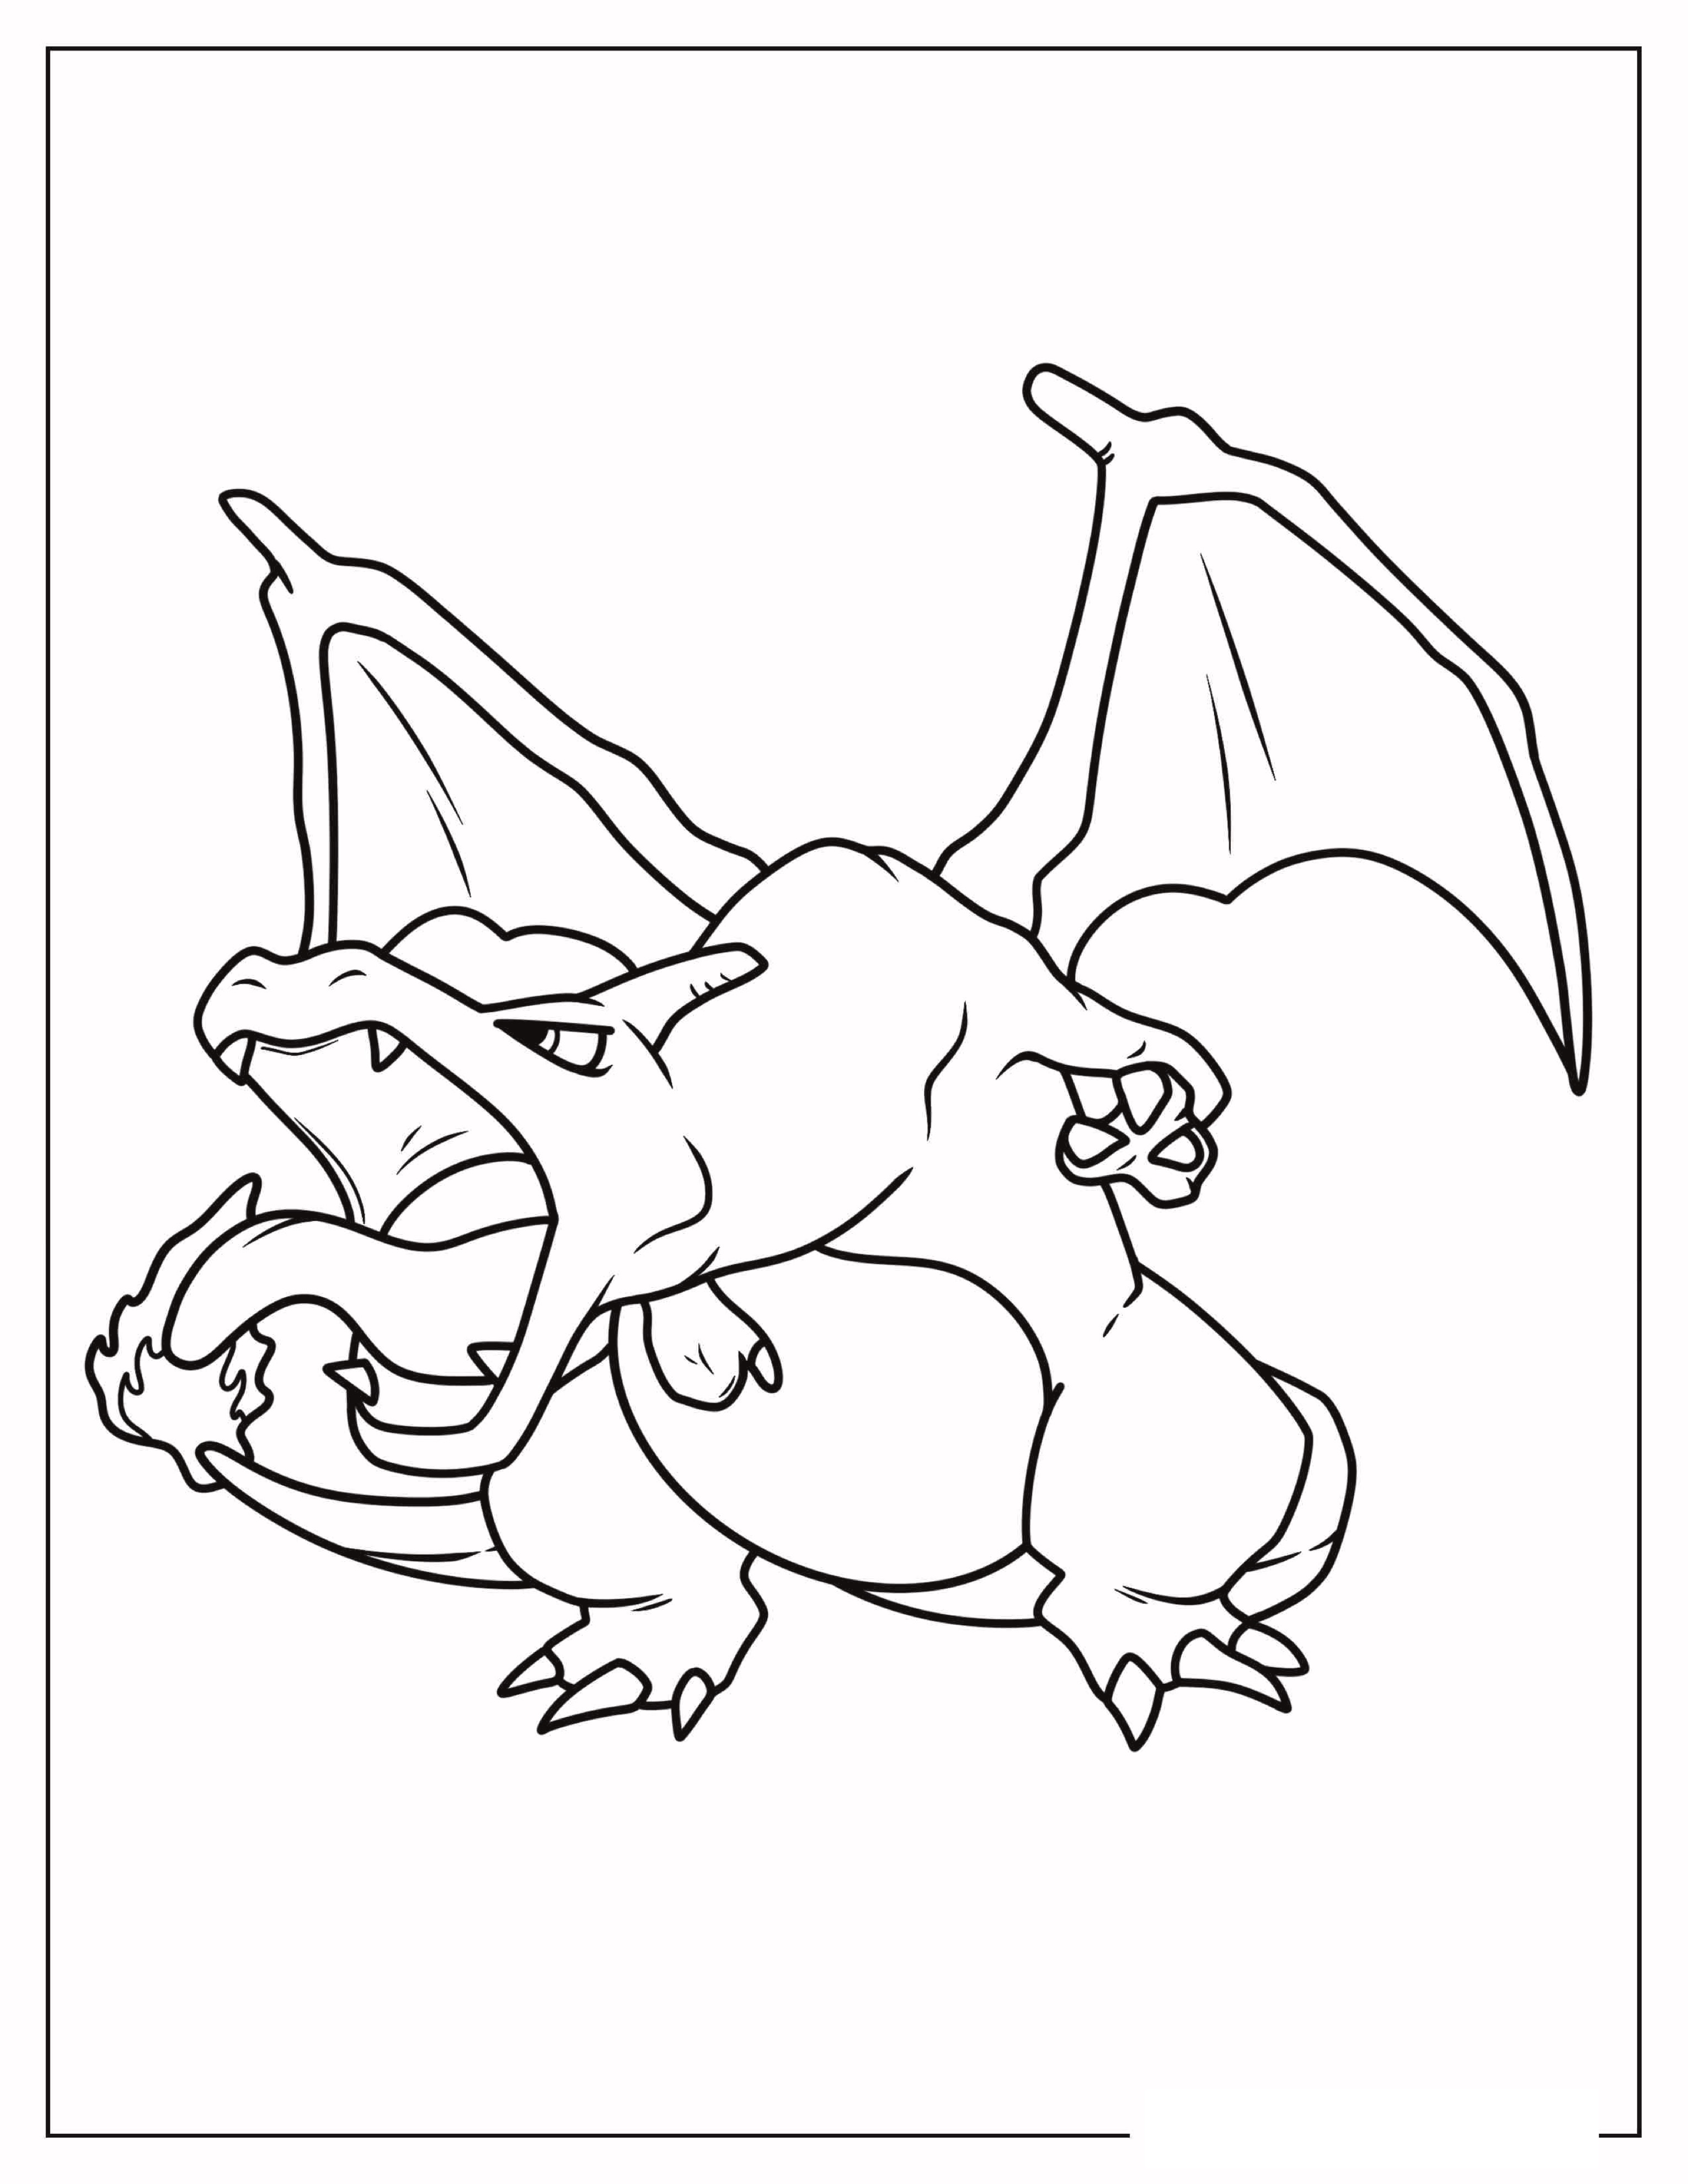 Easy-To-Color-Charizard.jpg